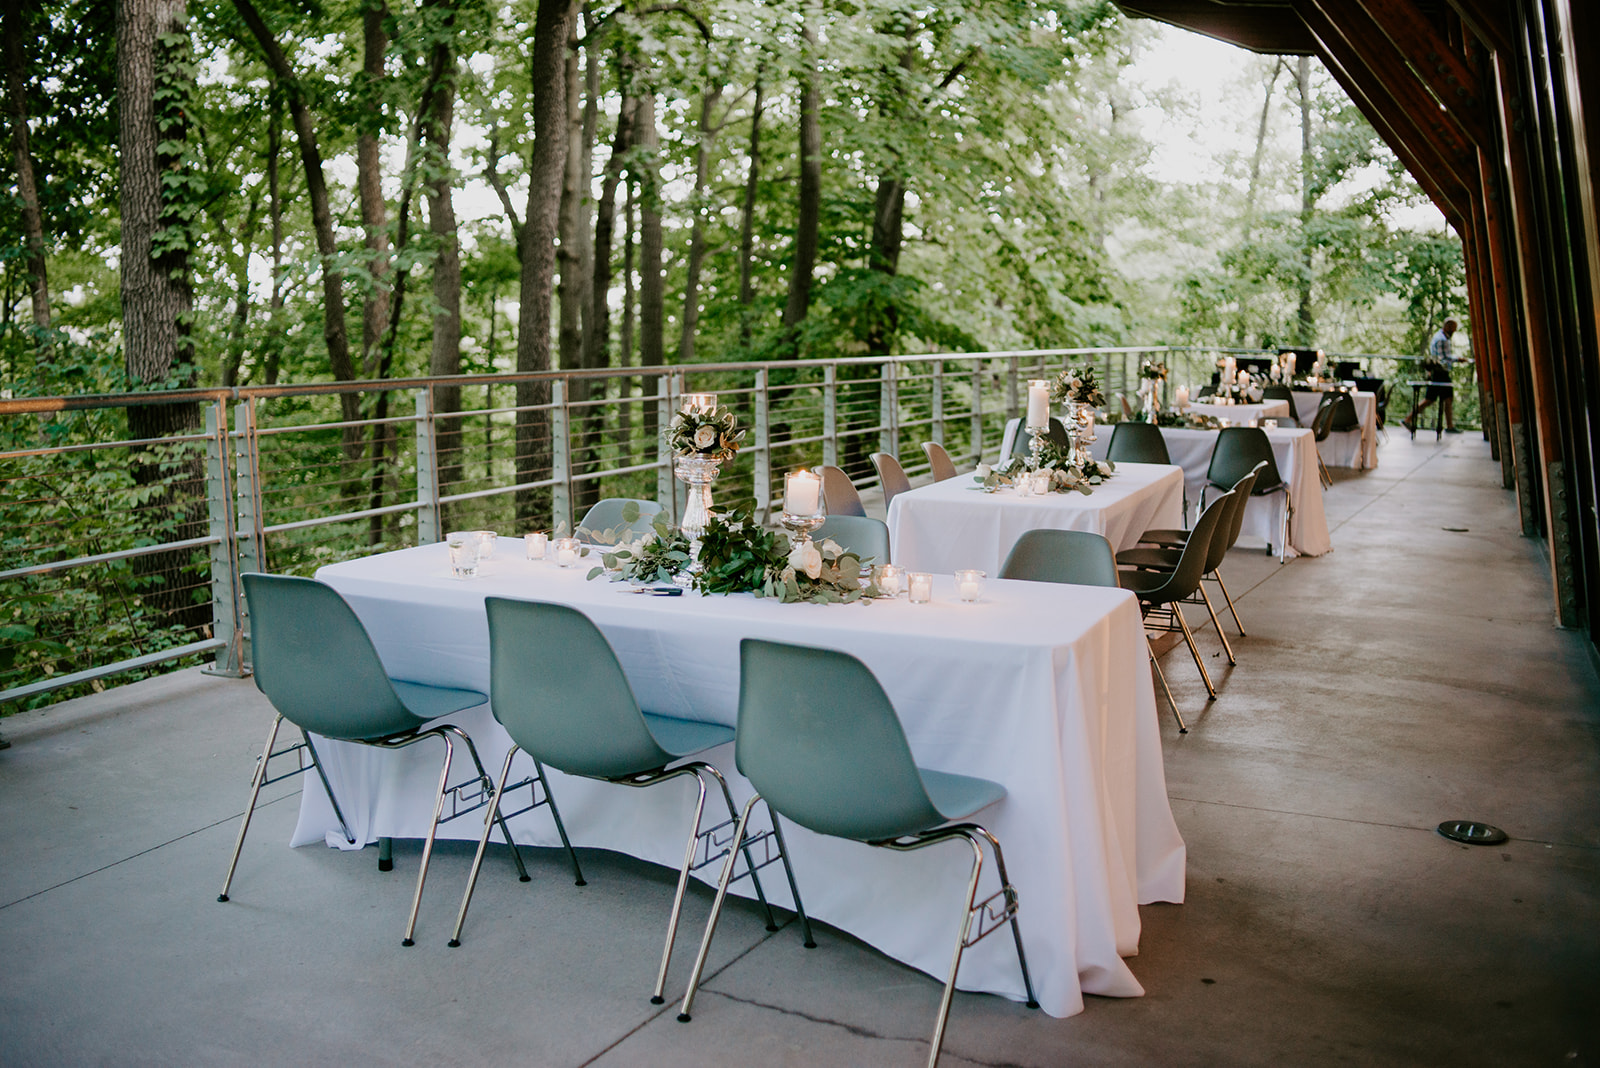 reception photos from john ball zoo bissell treehouse wedding details inspiration Liv Lyszyk Photography Grand Rapids, Michigan